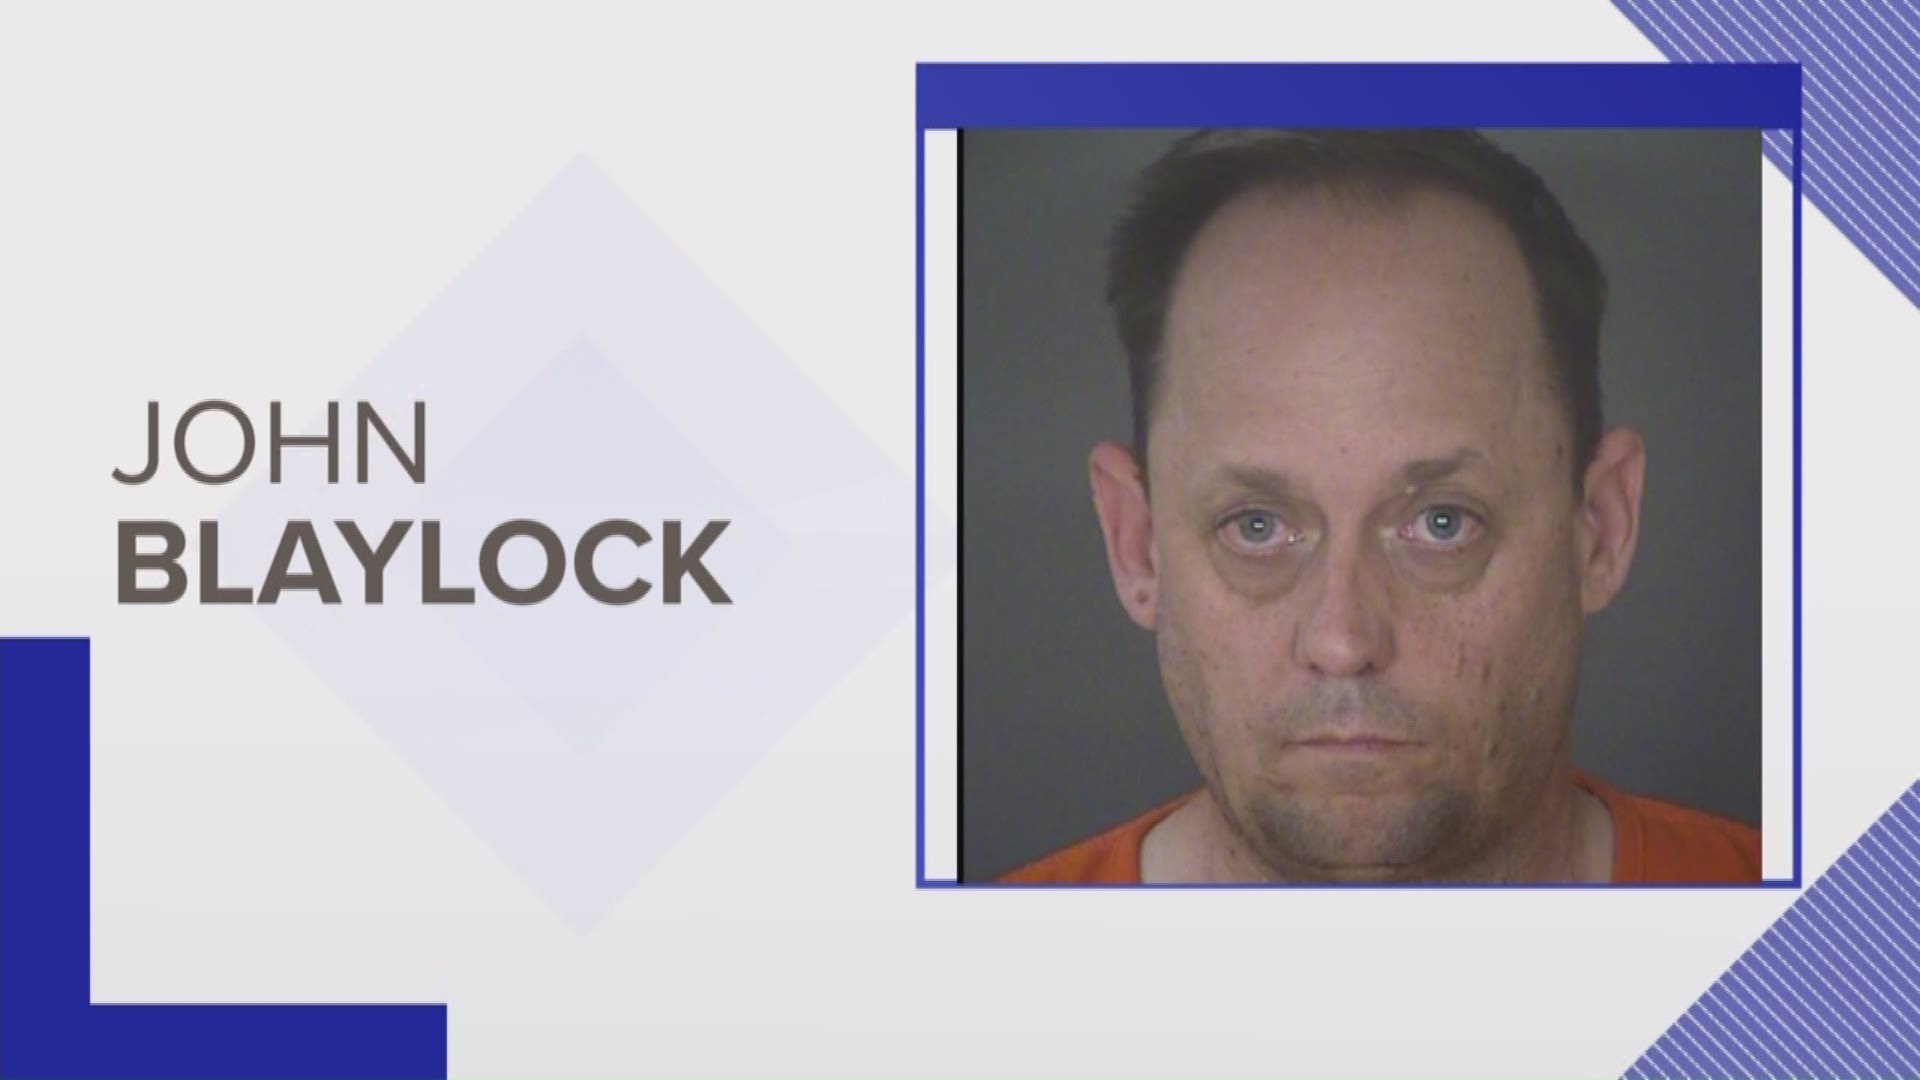 John Baylock, 45, claimed to be a church youth director to a family and is now accused of sexually abusing a child.